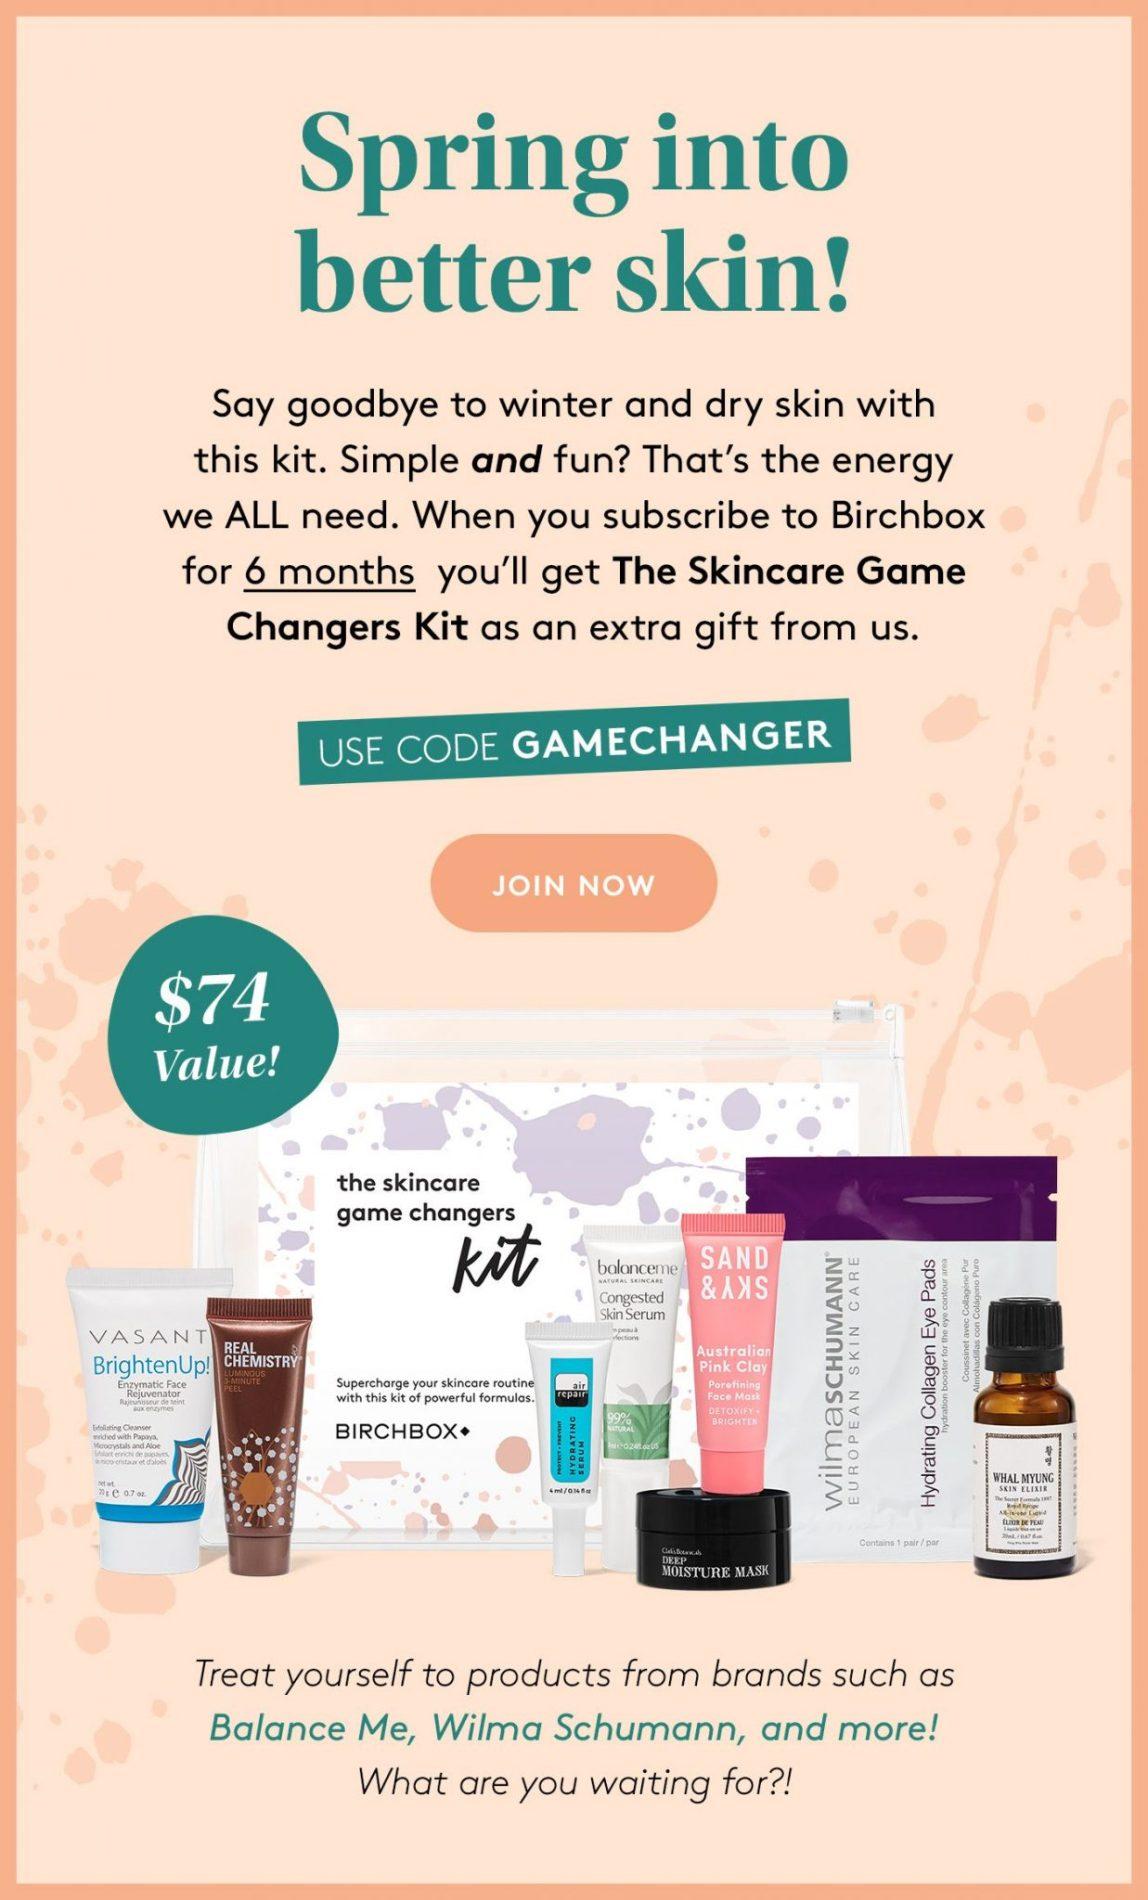 Birchbox Coupon Code – Free The Skincare Game Changers Kit with 6-Month Subscription